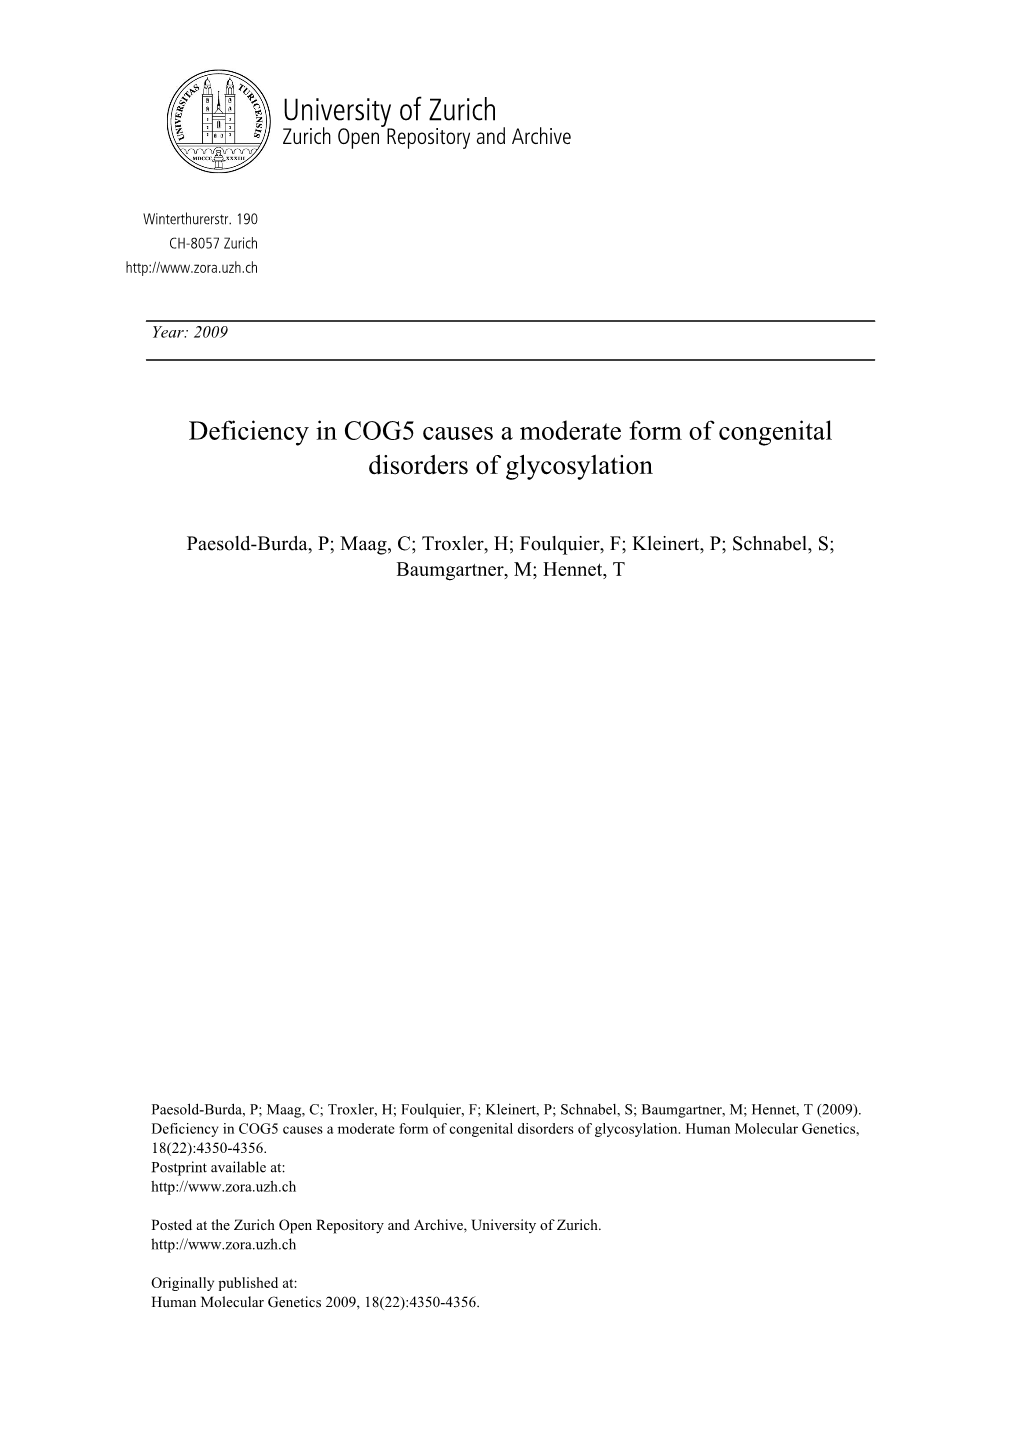 'Deficiency in COG5 Causes a Moderate Form of Congenital